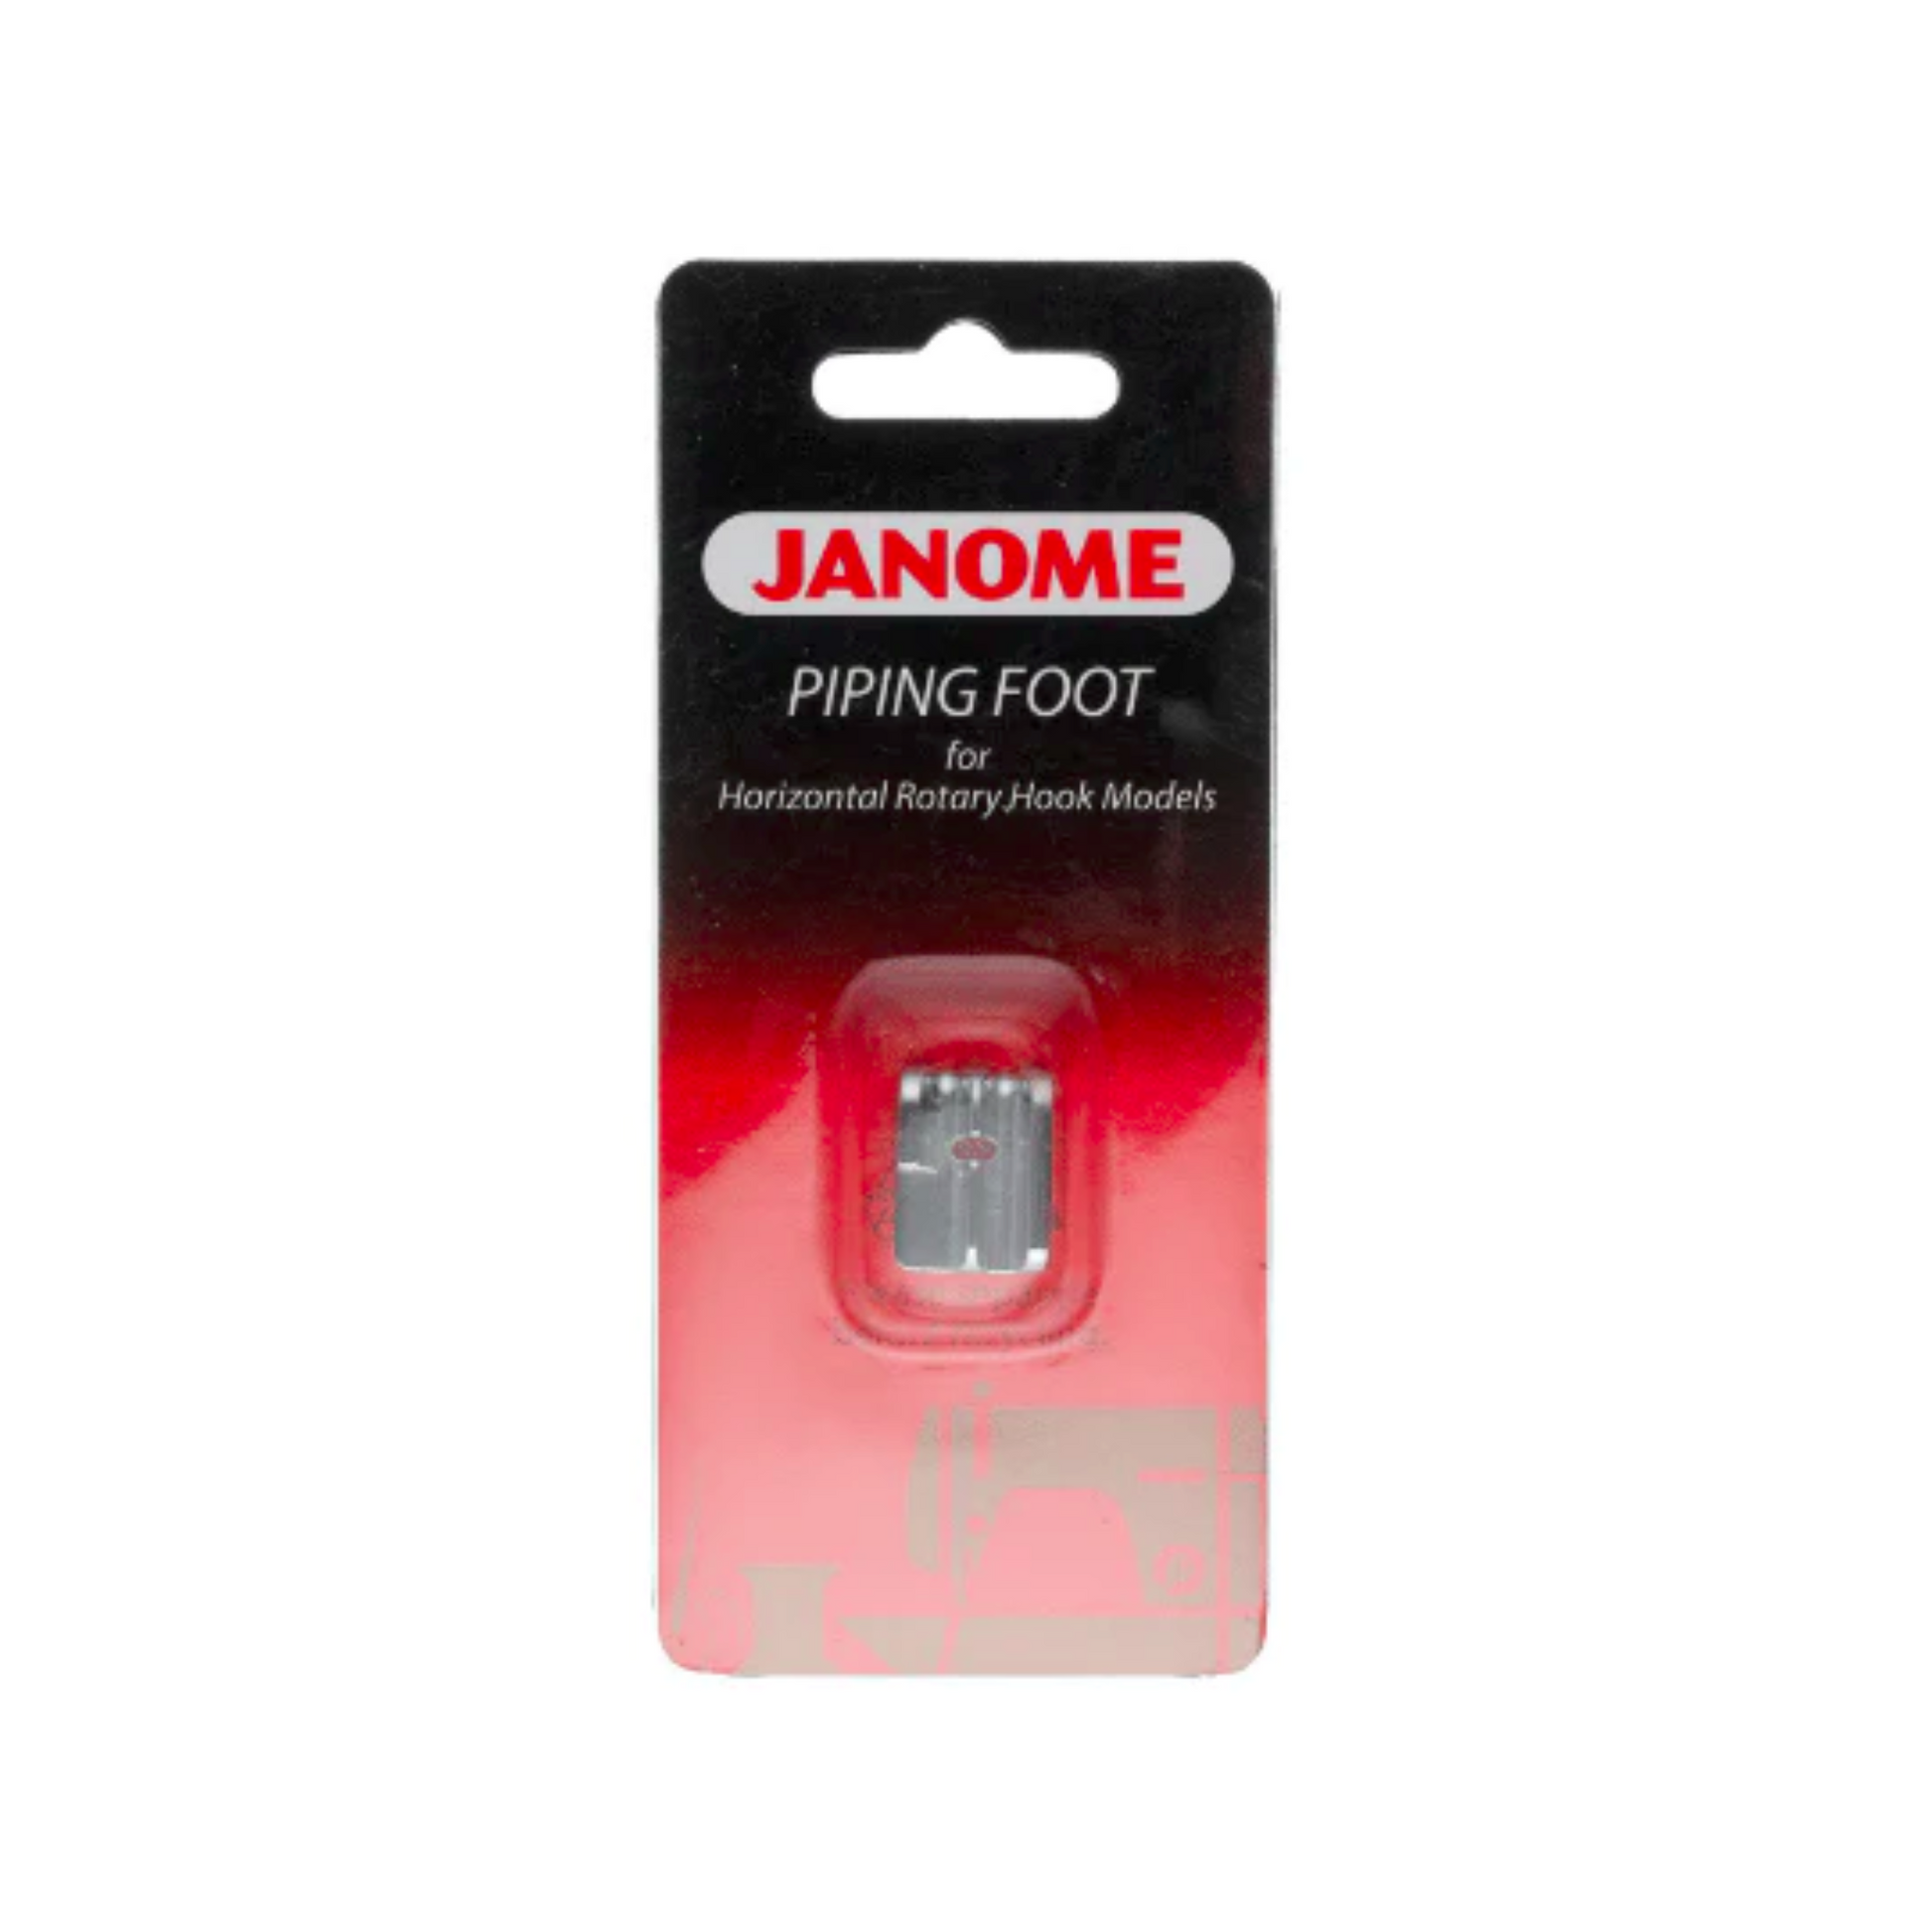 Janome piping foot - Sewing accessory - SIlver - Packet